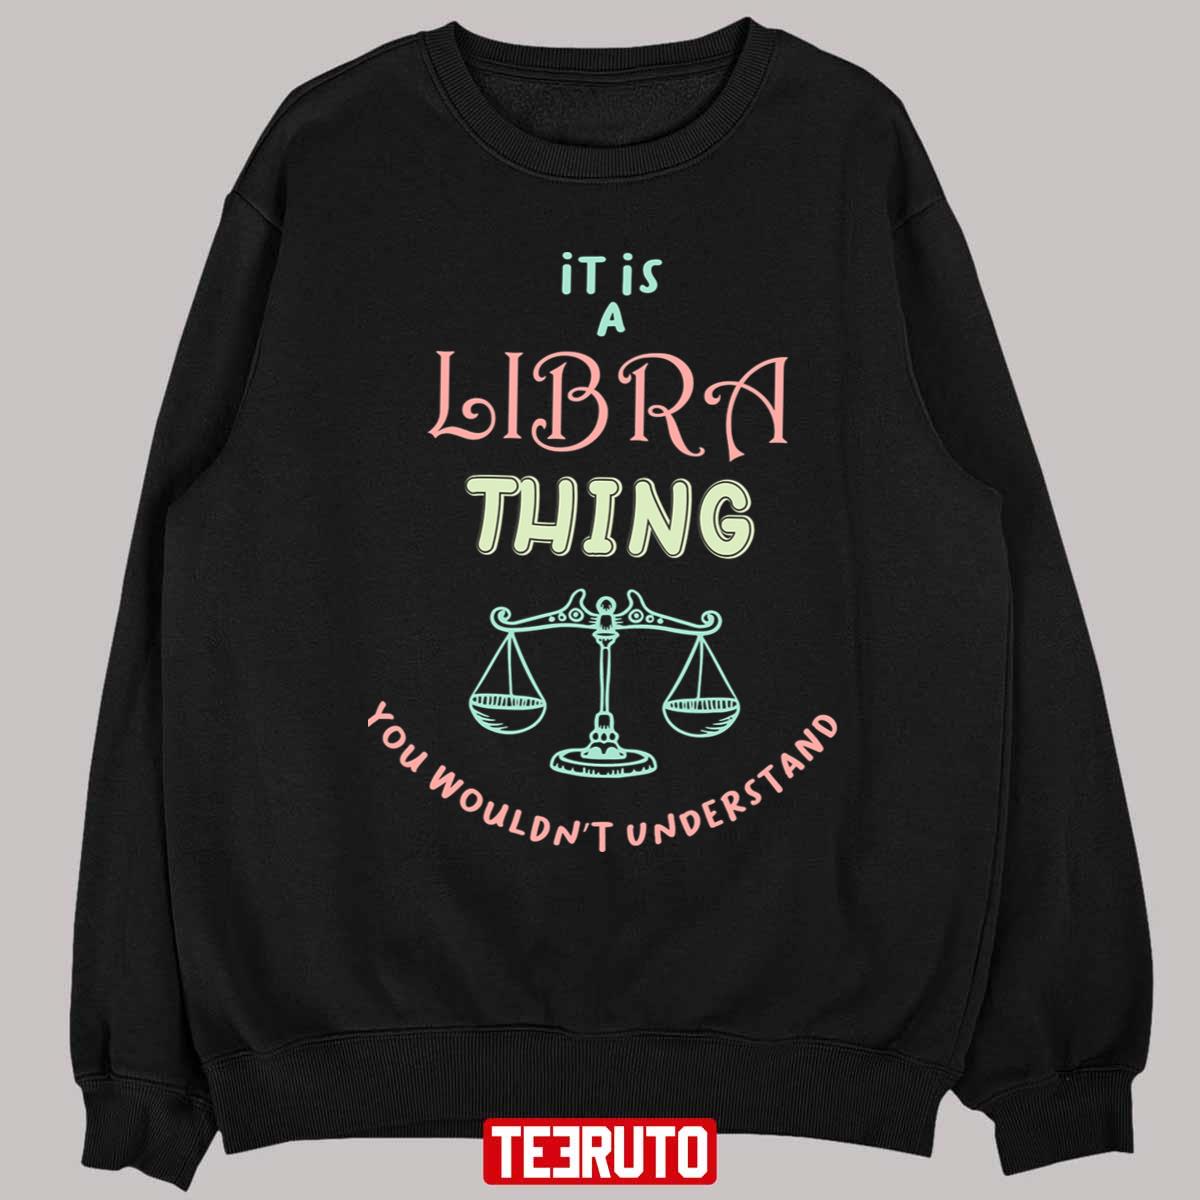 Libra Things You Wouldn't Understand Colorful Unisex T-Shirt